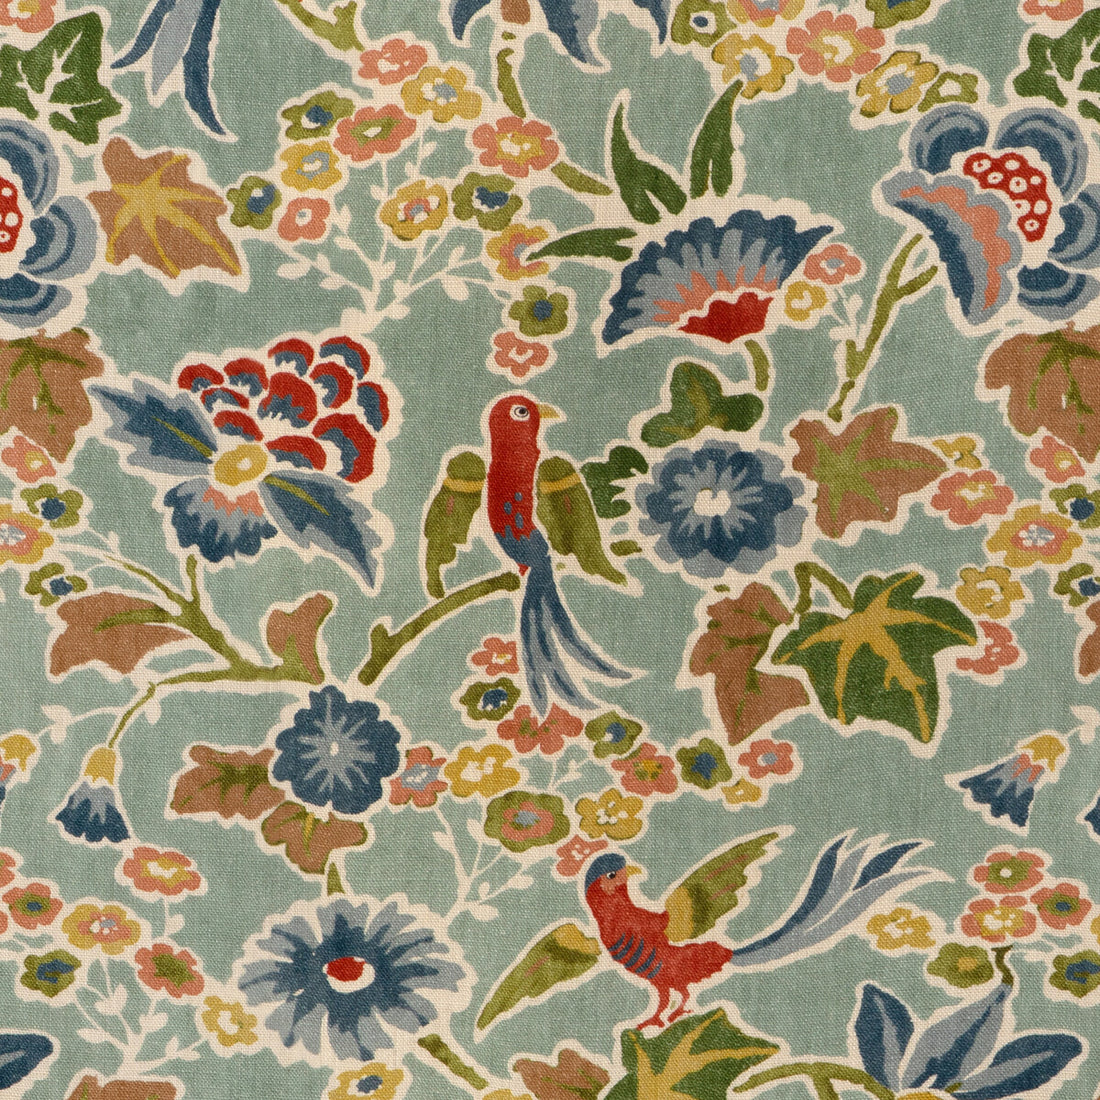 Posy Print fabric in aqua/ivy color - pattern 2023142.353.0 - by Lee Jofa in the Garden Walk collection